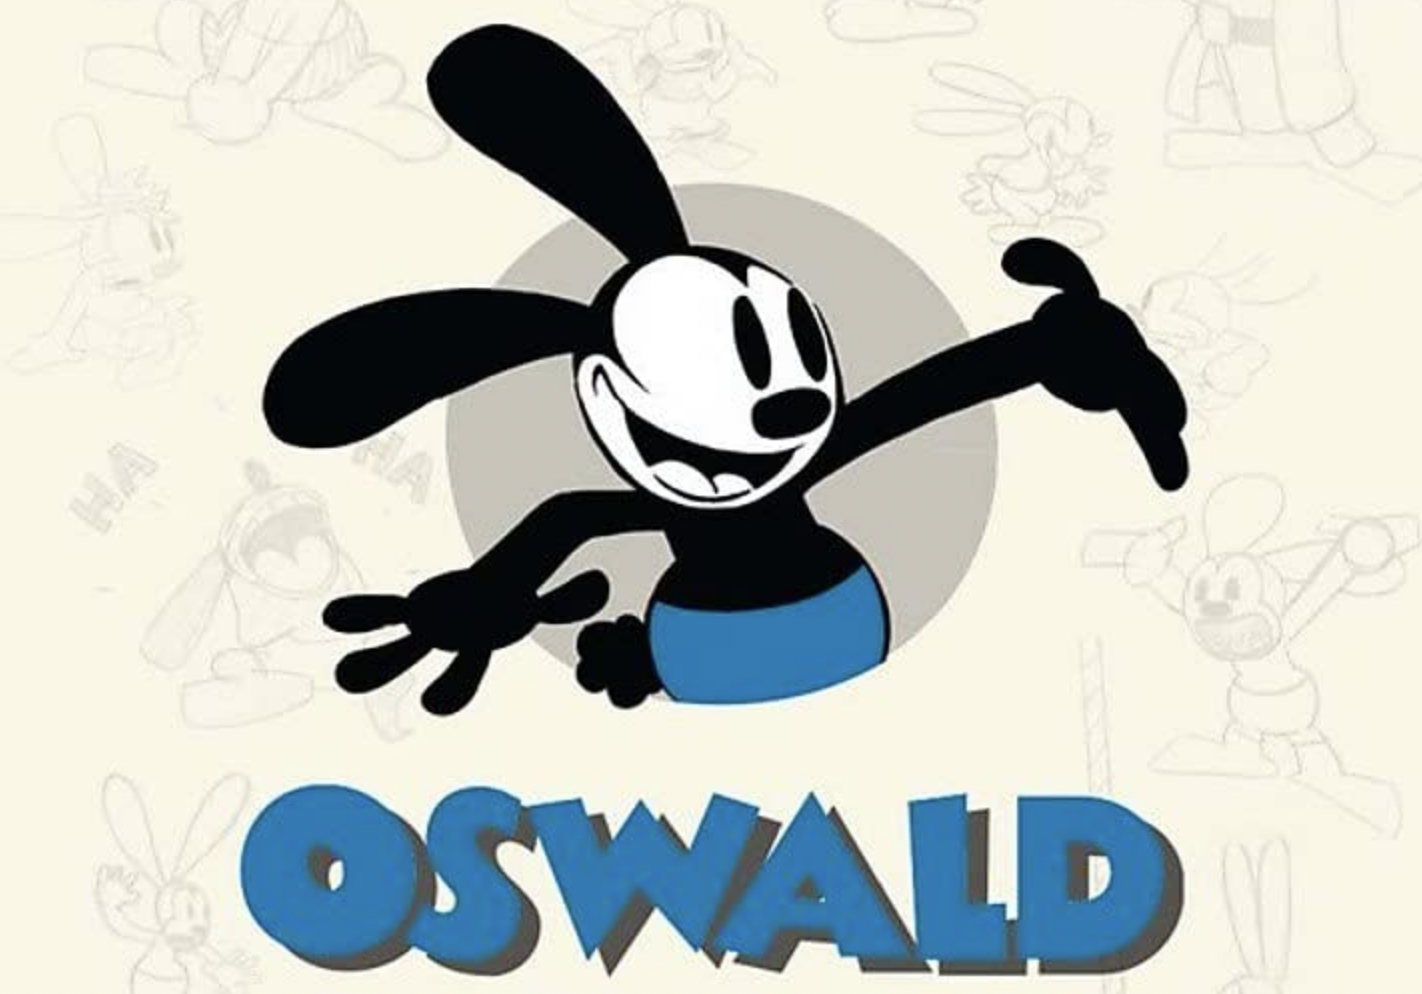 OPINION: It’s About Time Oswald the Lucky Rabbit Gets His Time In The Spotlight